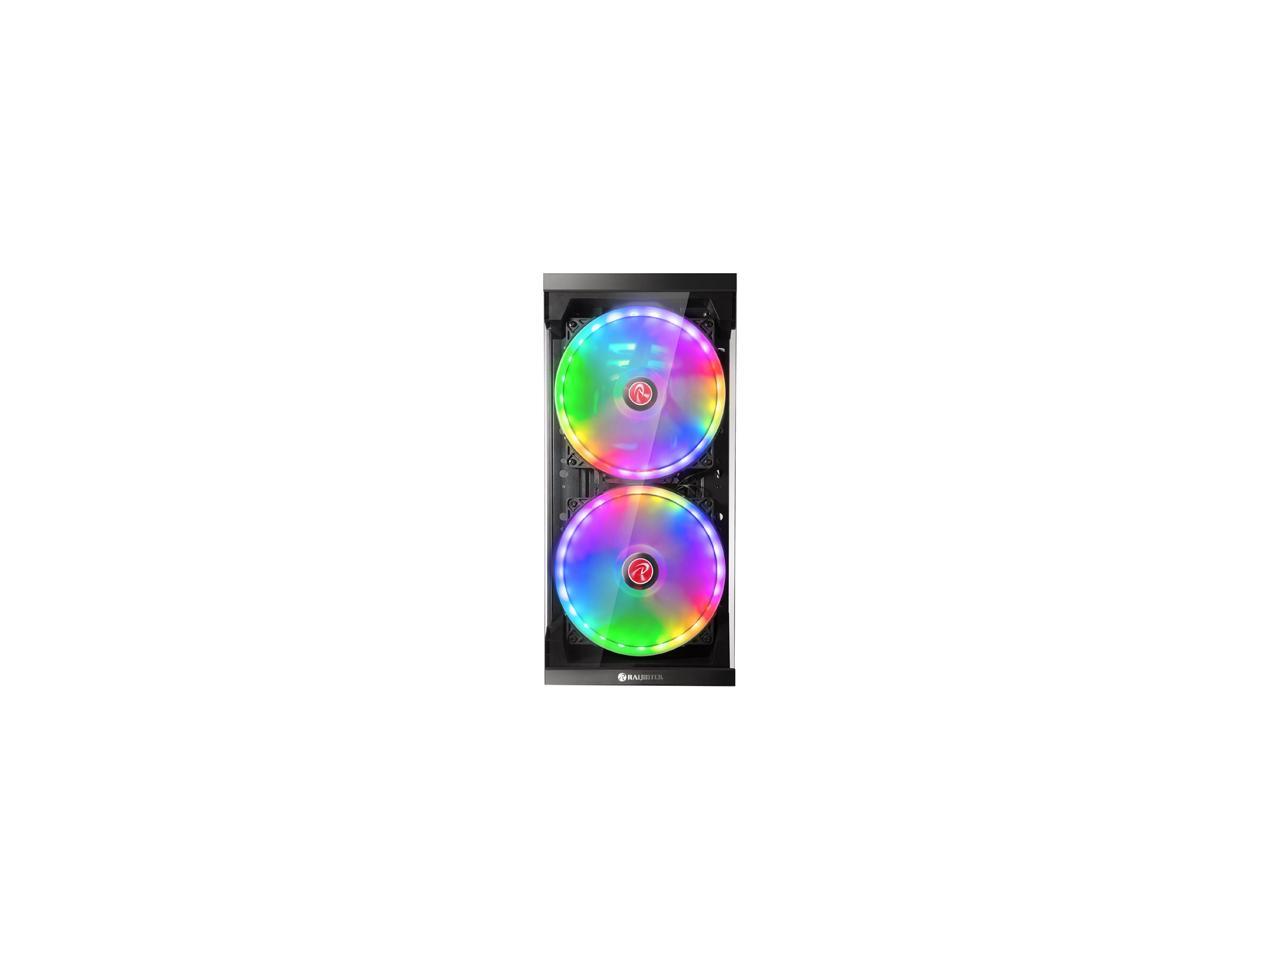 RAIJINTEK SILENOS PRO, ATX Tower with Clean Transparent Front and Side Tempered Glass (4.0mm) Design, Comes with Pre-installed 2pcs ARGB 200mm Fans at Front and 1pcs 120mm ARGB fan at Rear